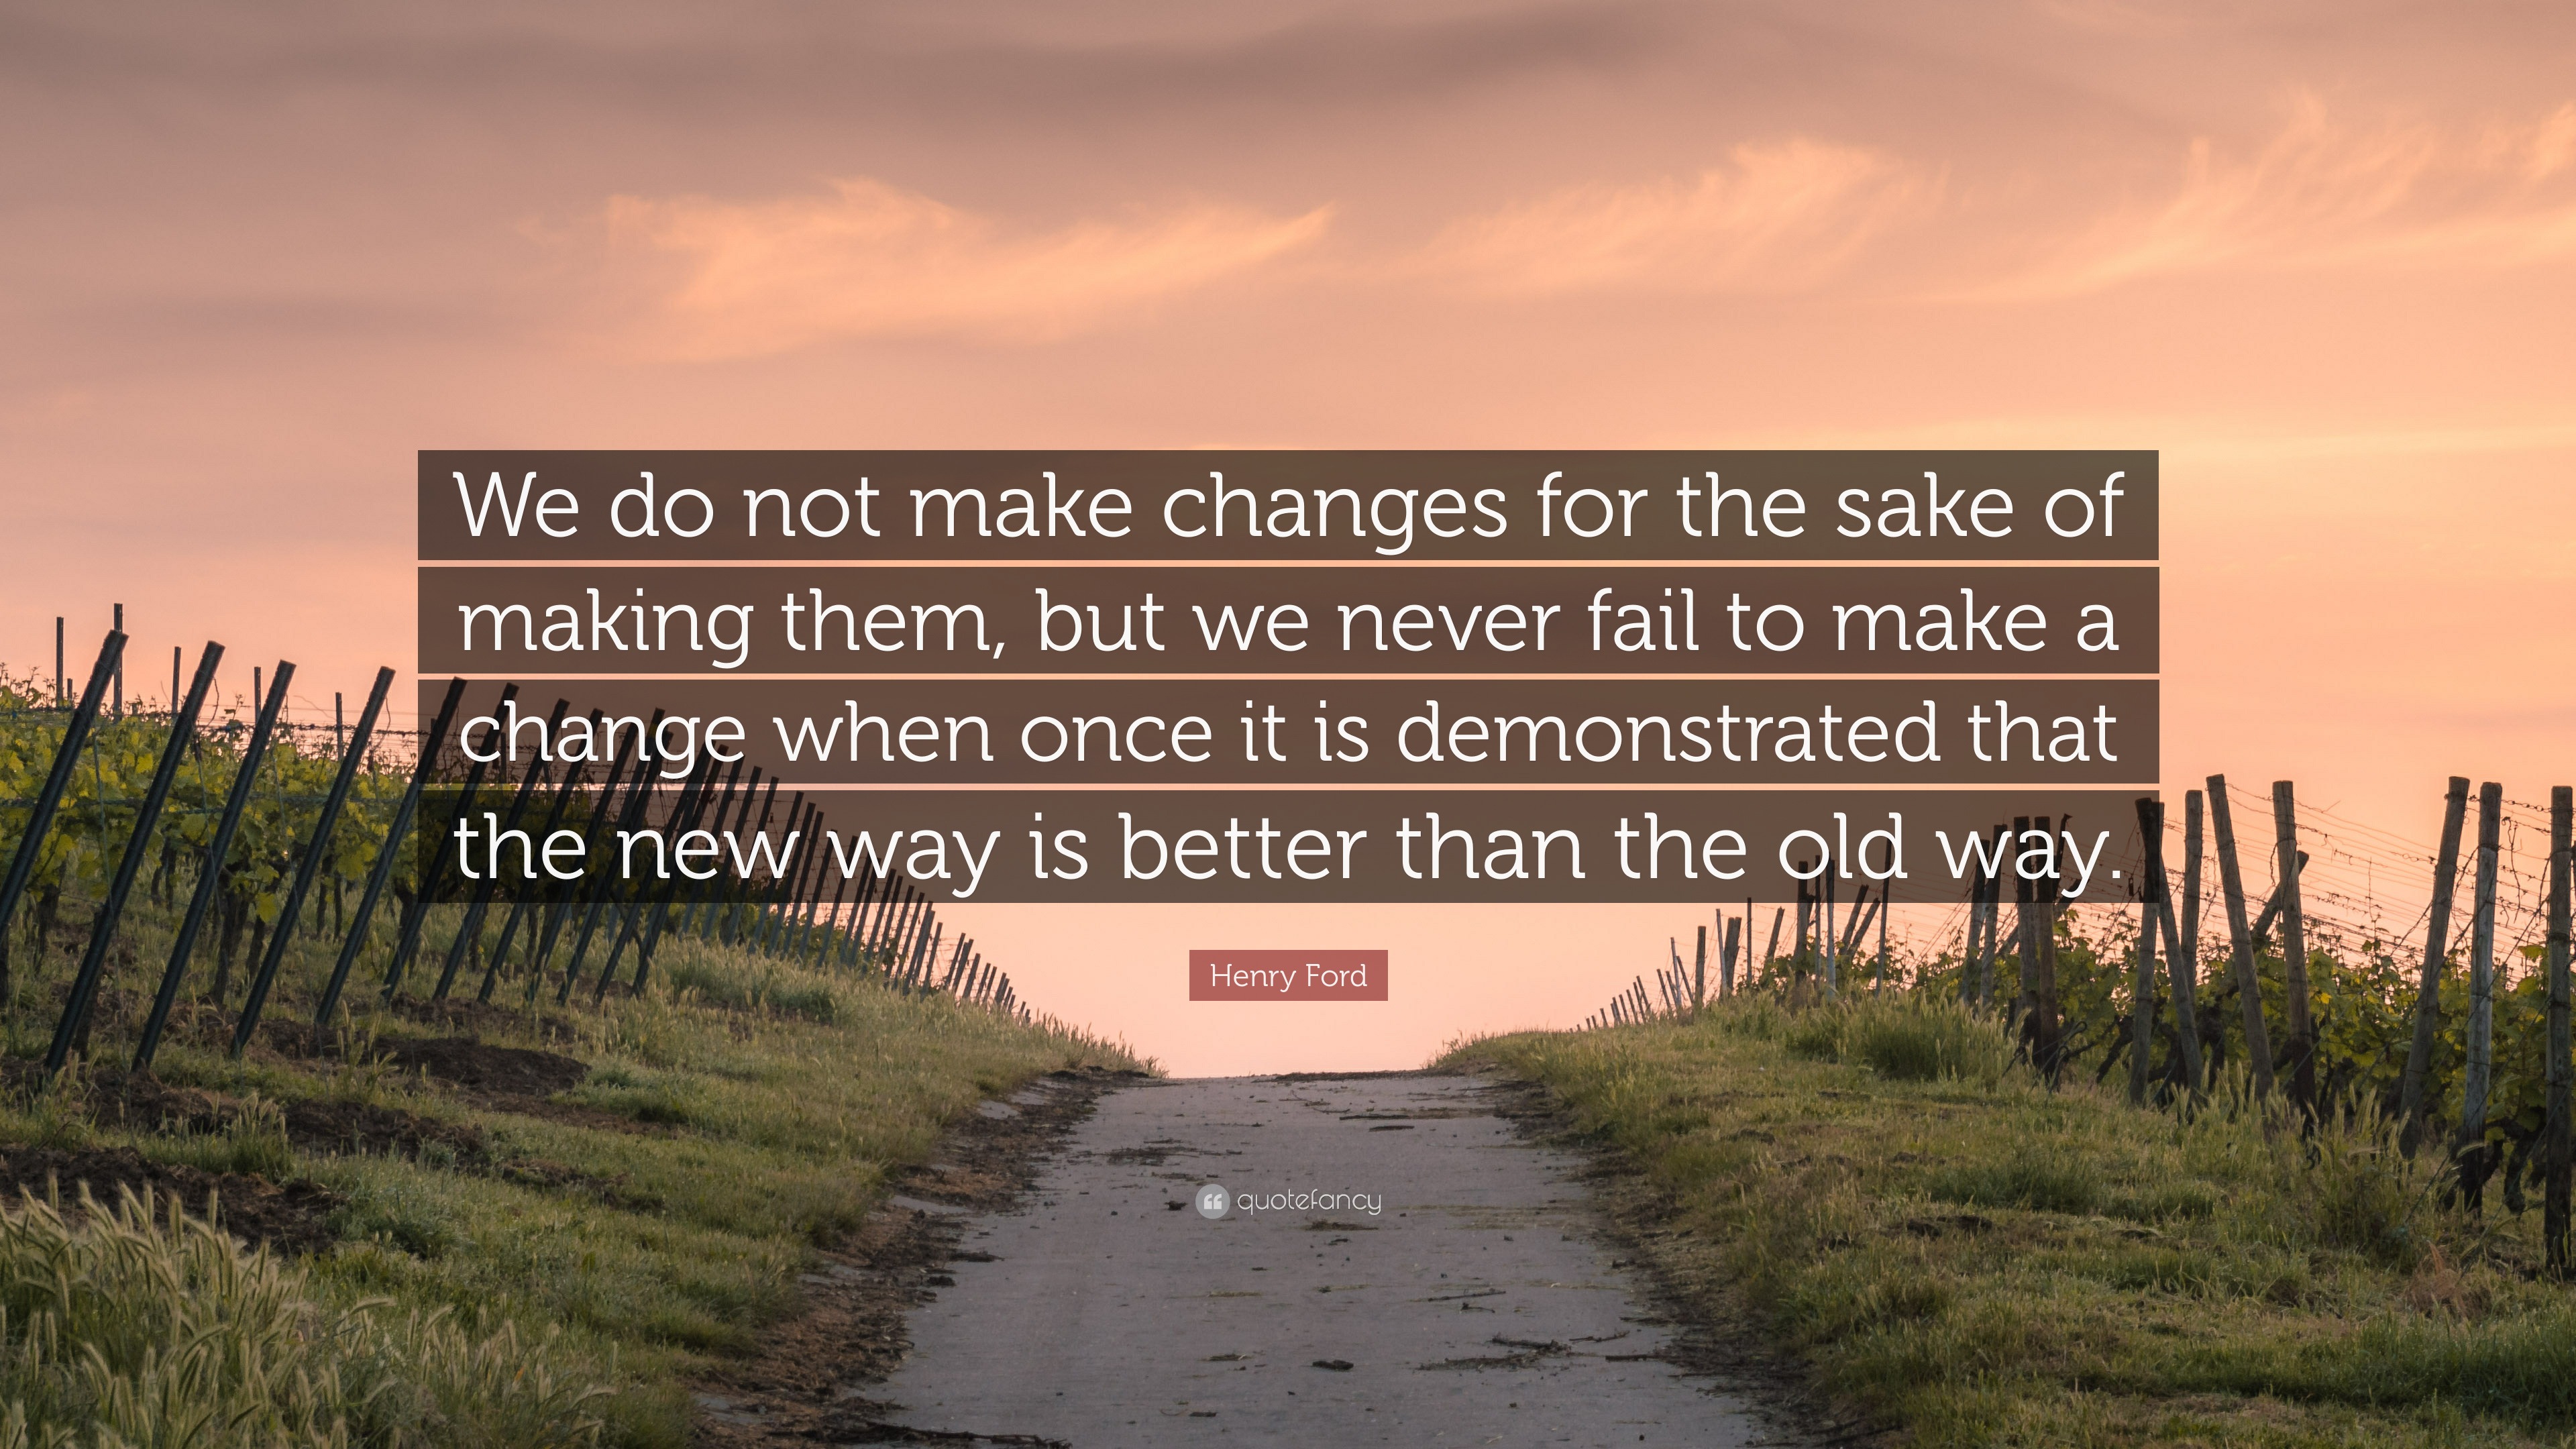 Henry Ford Quote: “We do not make changes for the sake of making them ...